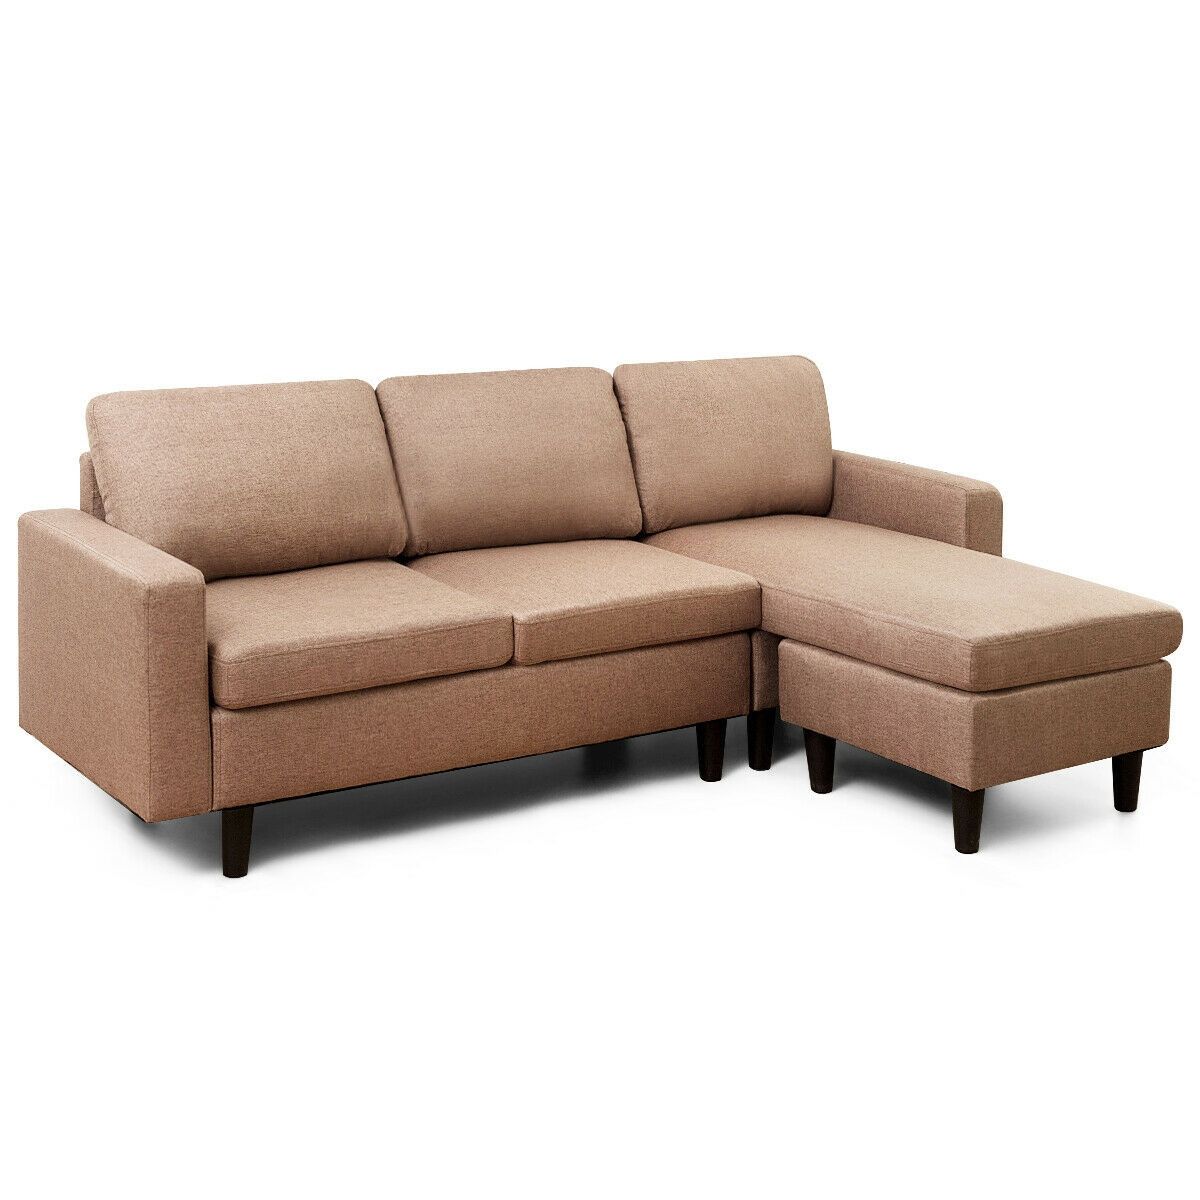 Convertible L Shaped Sectional Sofa Couch With Massage Cushion – Costway With Regard To Convertible L Shaped Sectional Sofas (View 10 of 20)